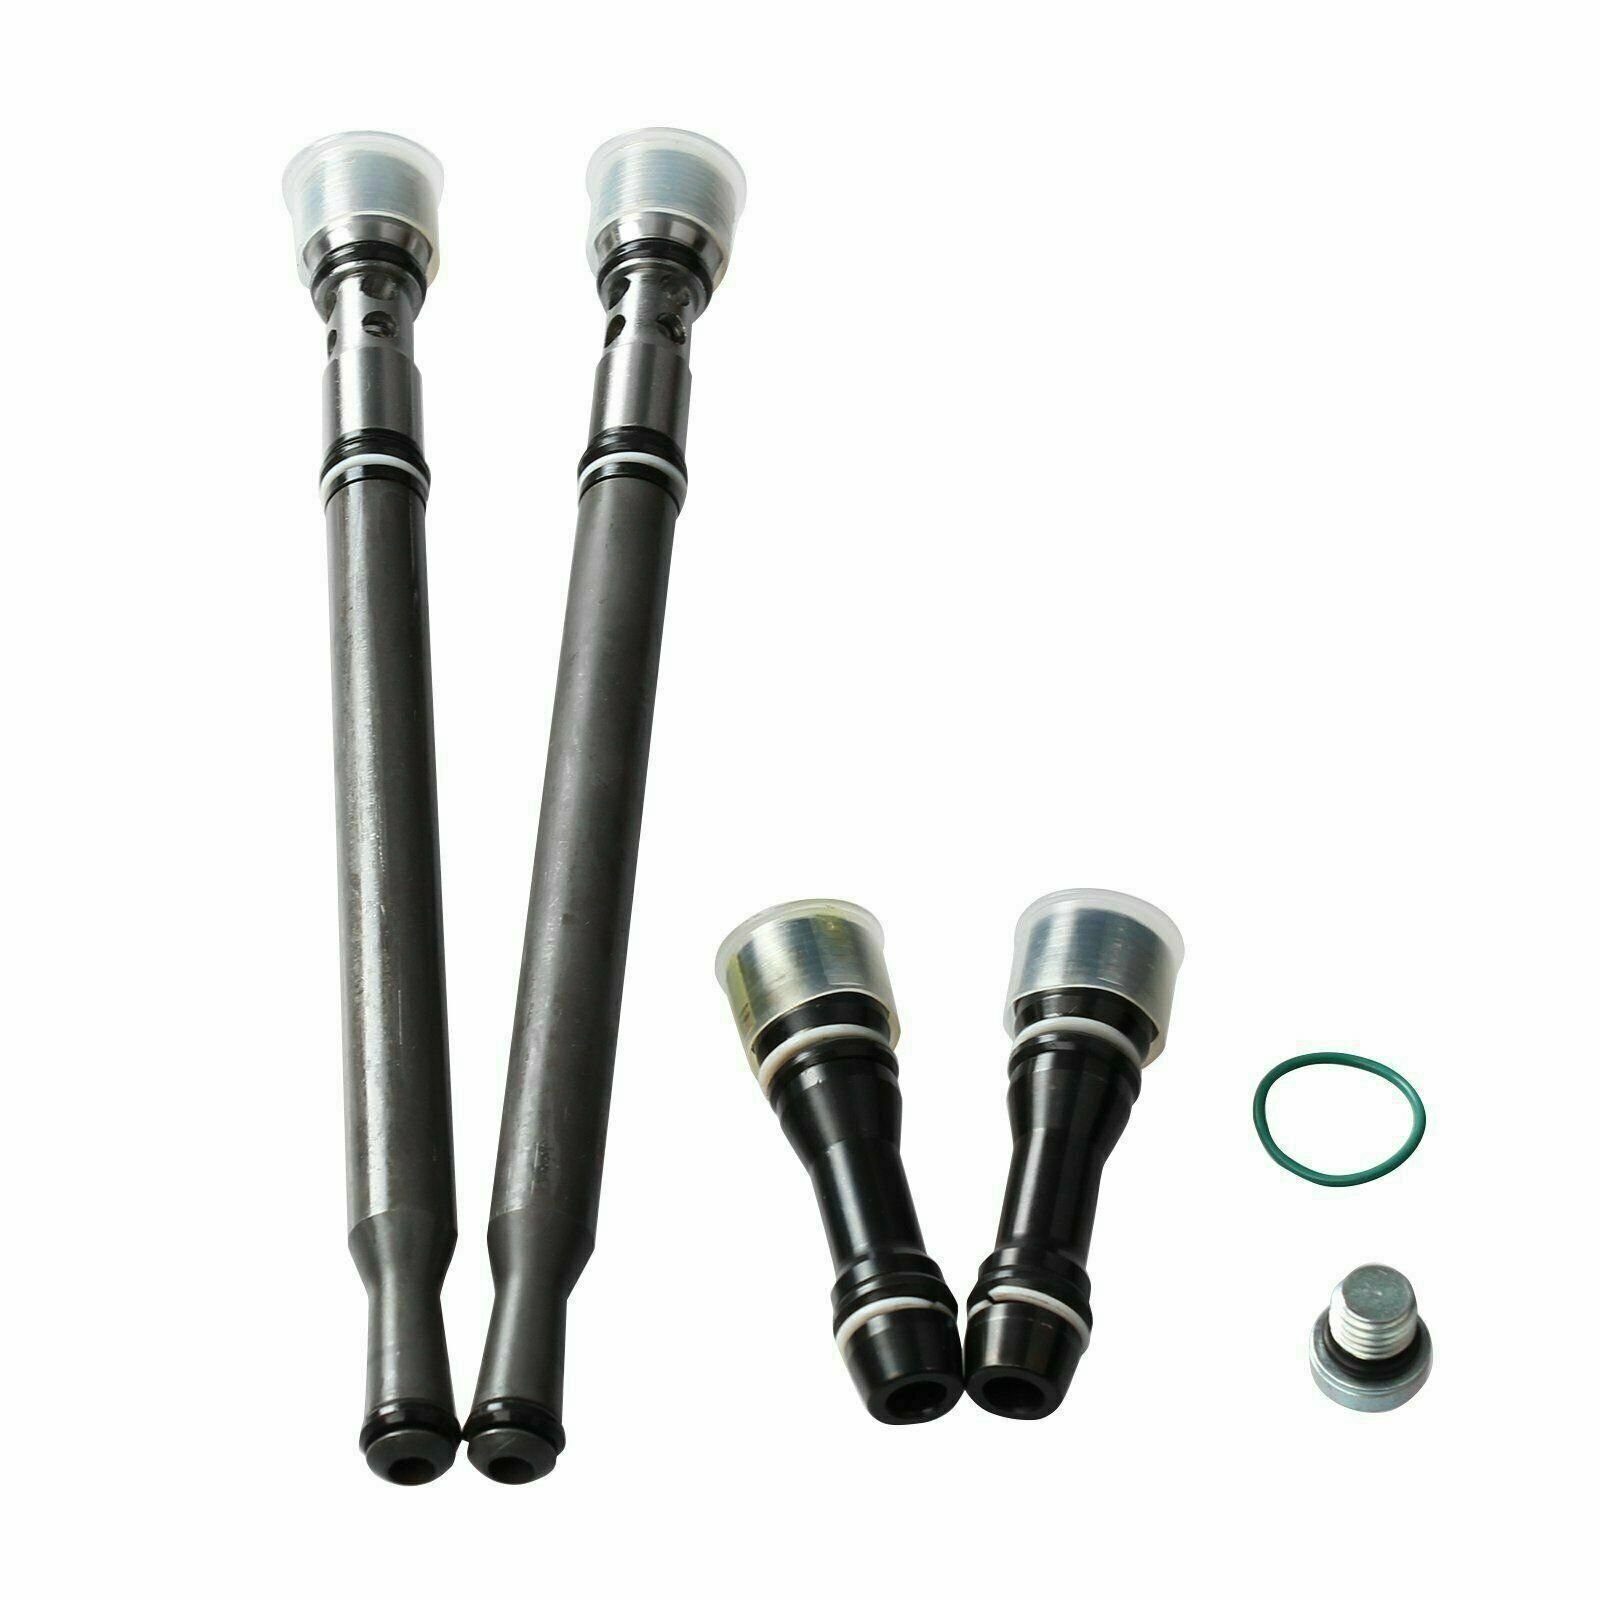 FITS 2004-2010 Ford 6.0L Powerstroke Diesel Updated Stand Pipe & Dummy Plug Kit